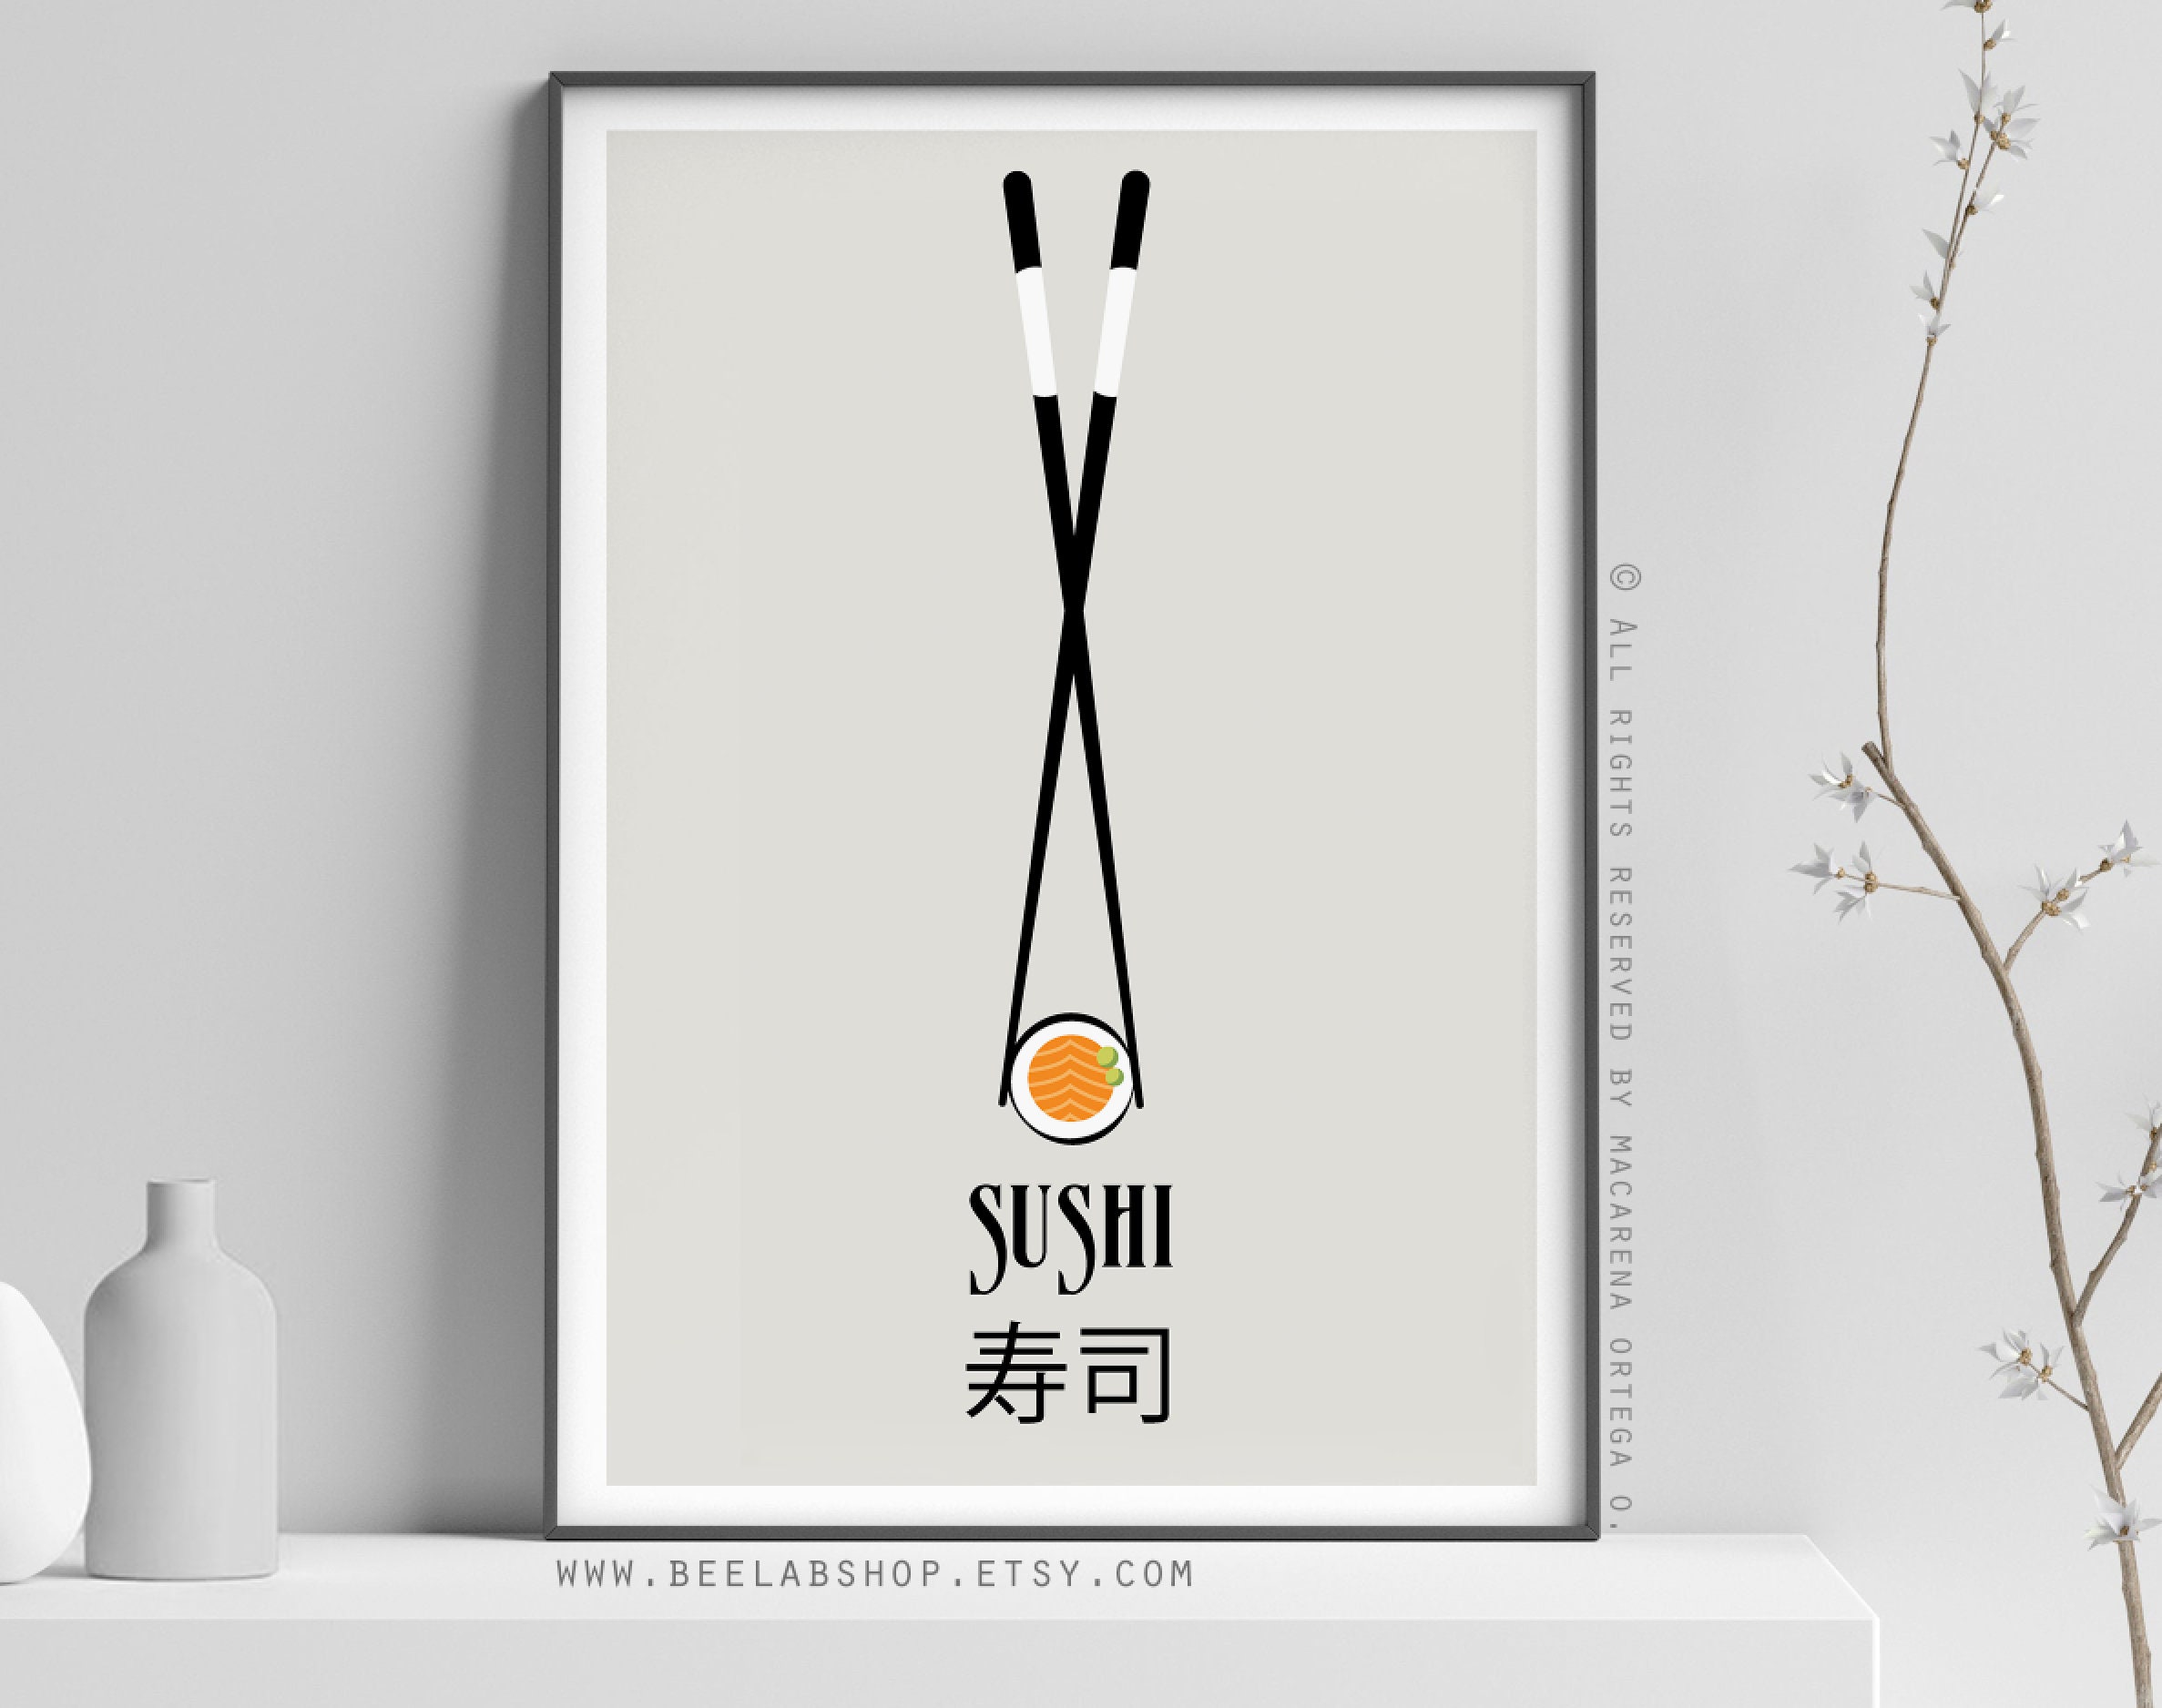 Sushi Lovers Gift, Sushi Guide Illustration, Vintage Style, Illustration  Art Print, Home Decor, Foodie, Poster, Japanese Food, Gift Idea